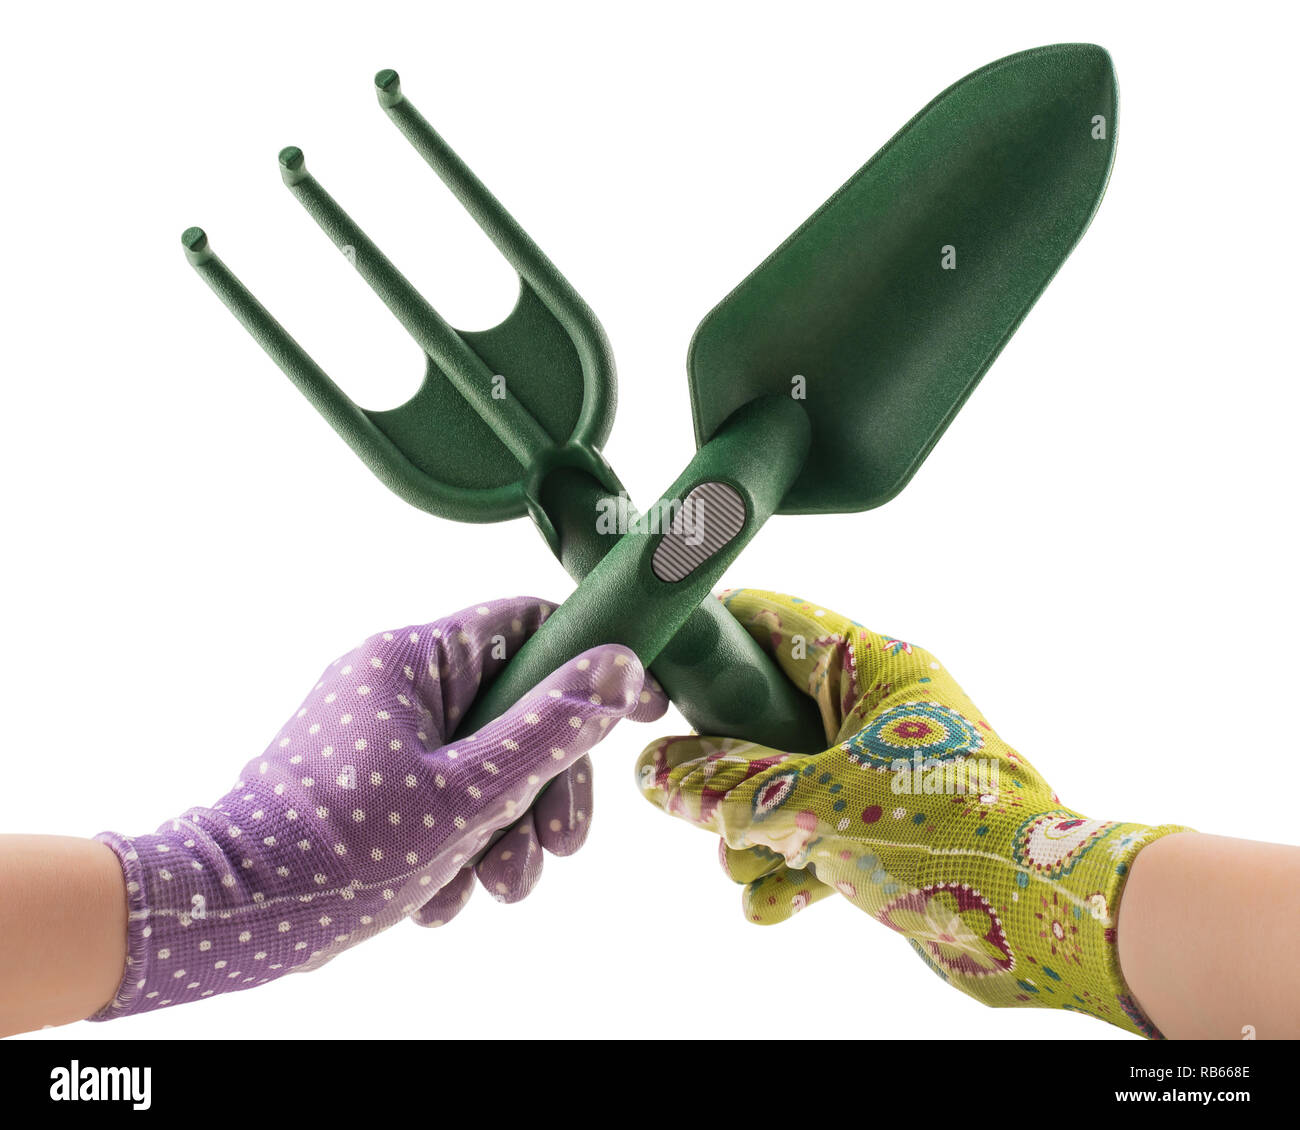 Crossed garden tools in gloved hands isolated on white background Stock Photo